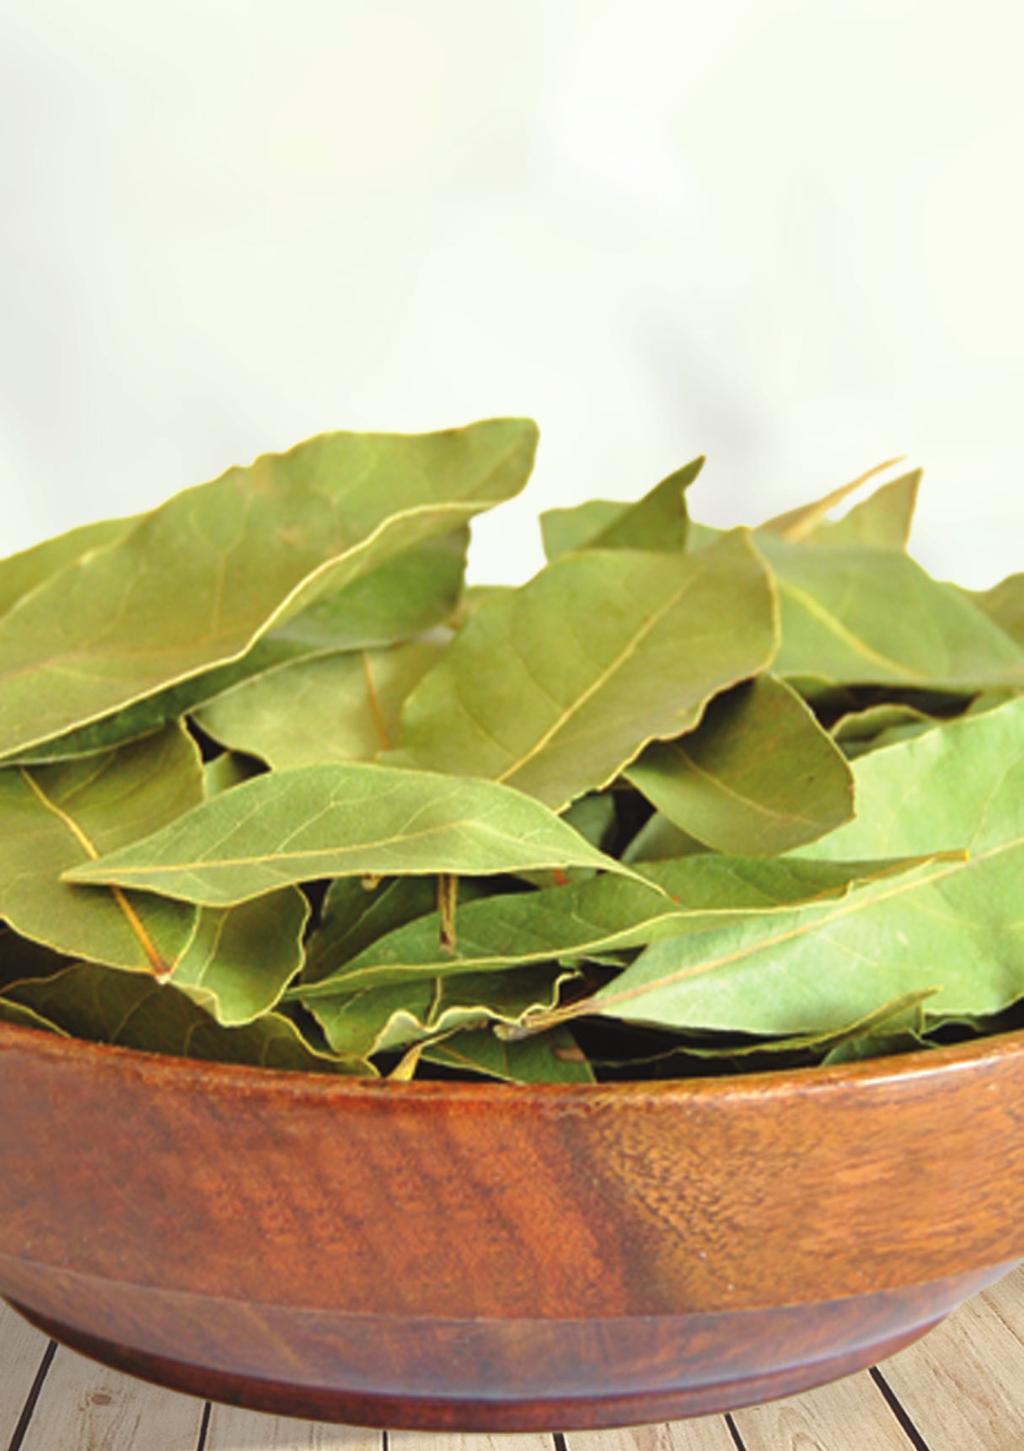 Bay / Laurel Leaf ( Laurus Nobilis ) Bay / laurel ( Laurus nobilis ) is an aromatic evergreen tree or a large shrub reaching 5 10 meters high and has dense branches with 4-10 cm long leaves.